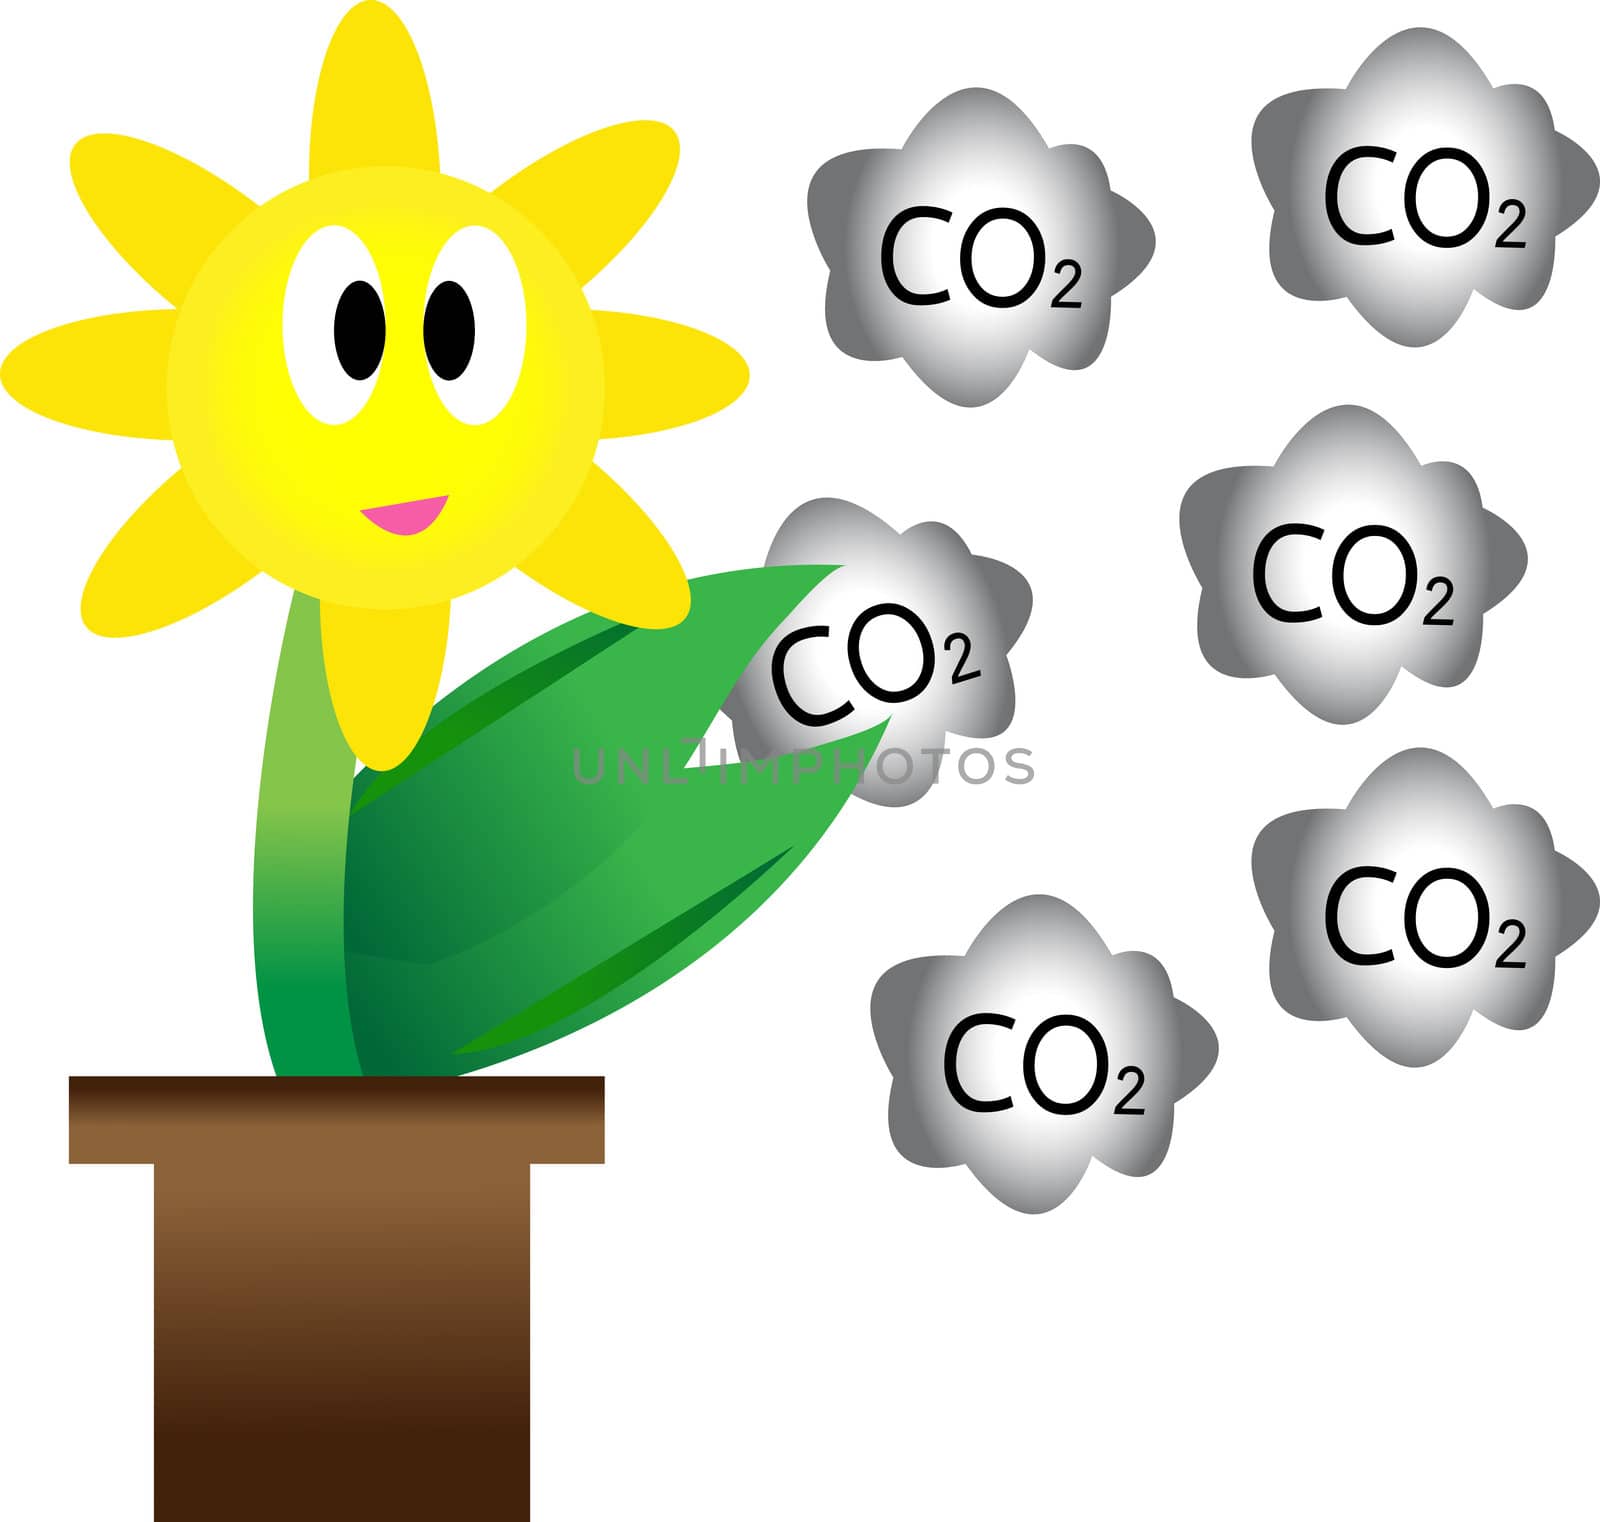 Flowers and carbon dioxide.
Concepts to reduce global warming. by kurapy